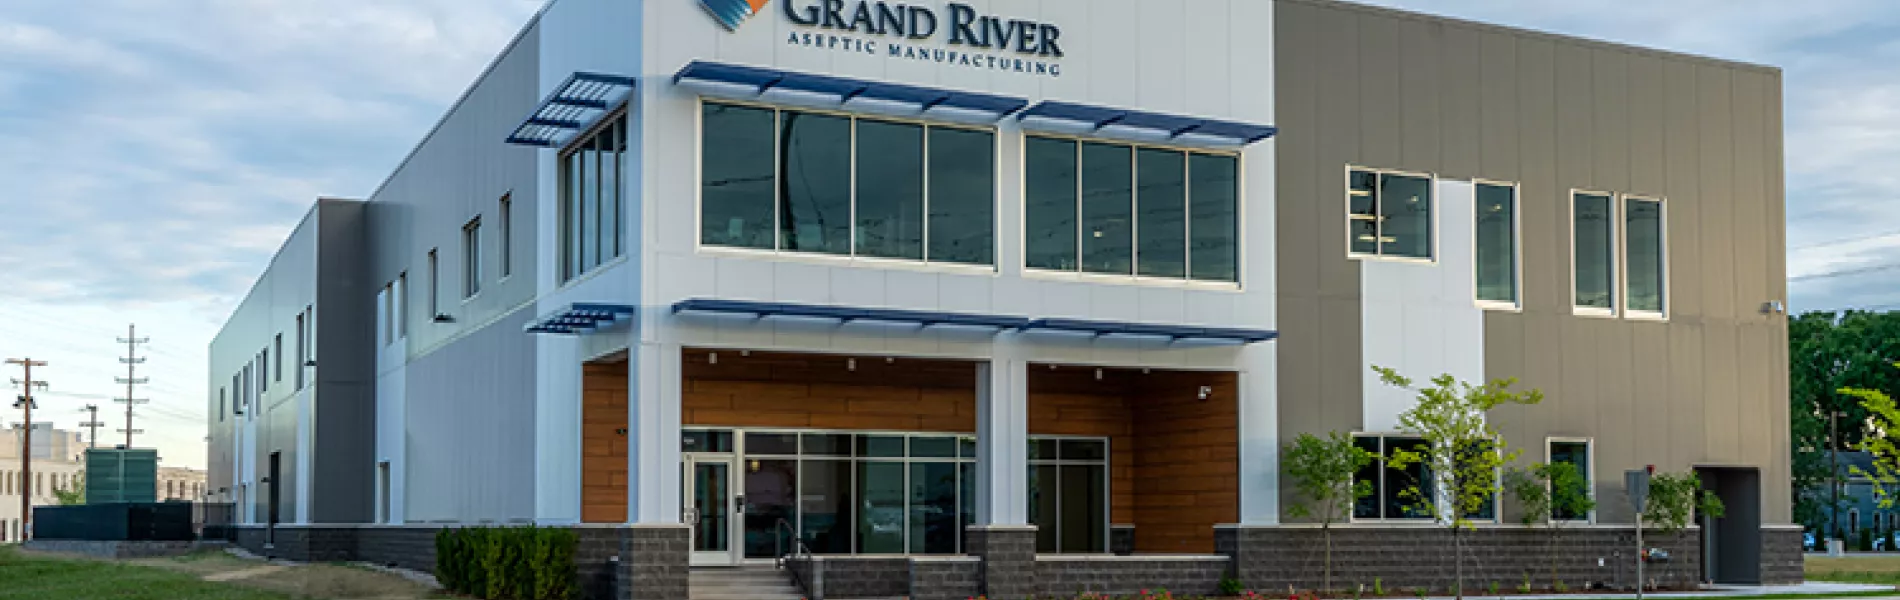 Grand River Aseptic Manufacturing Facility